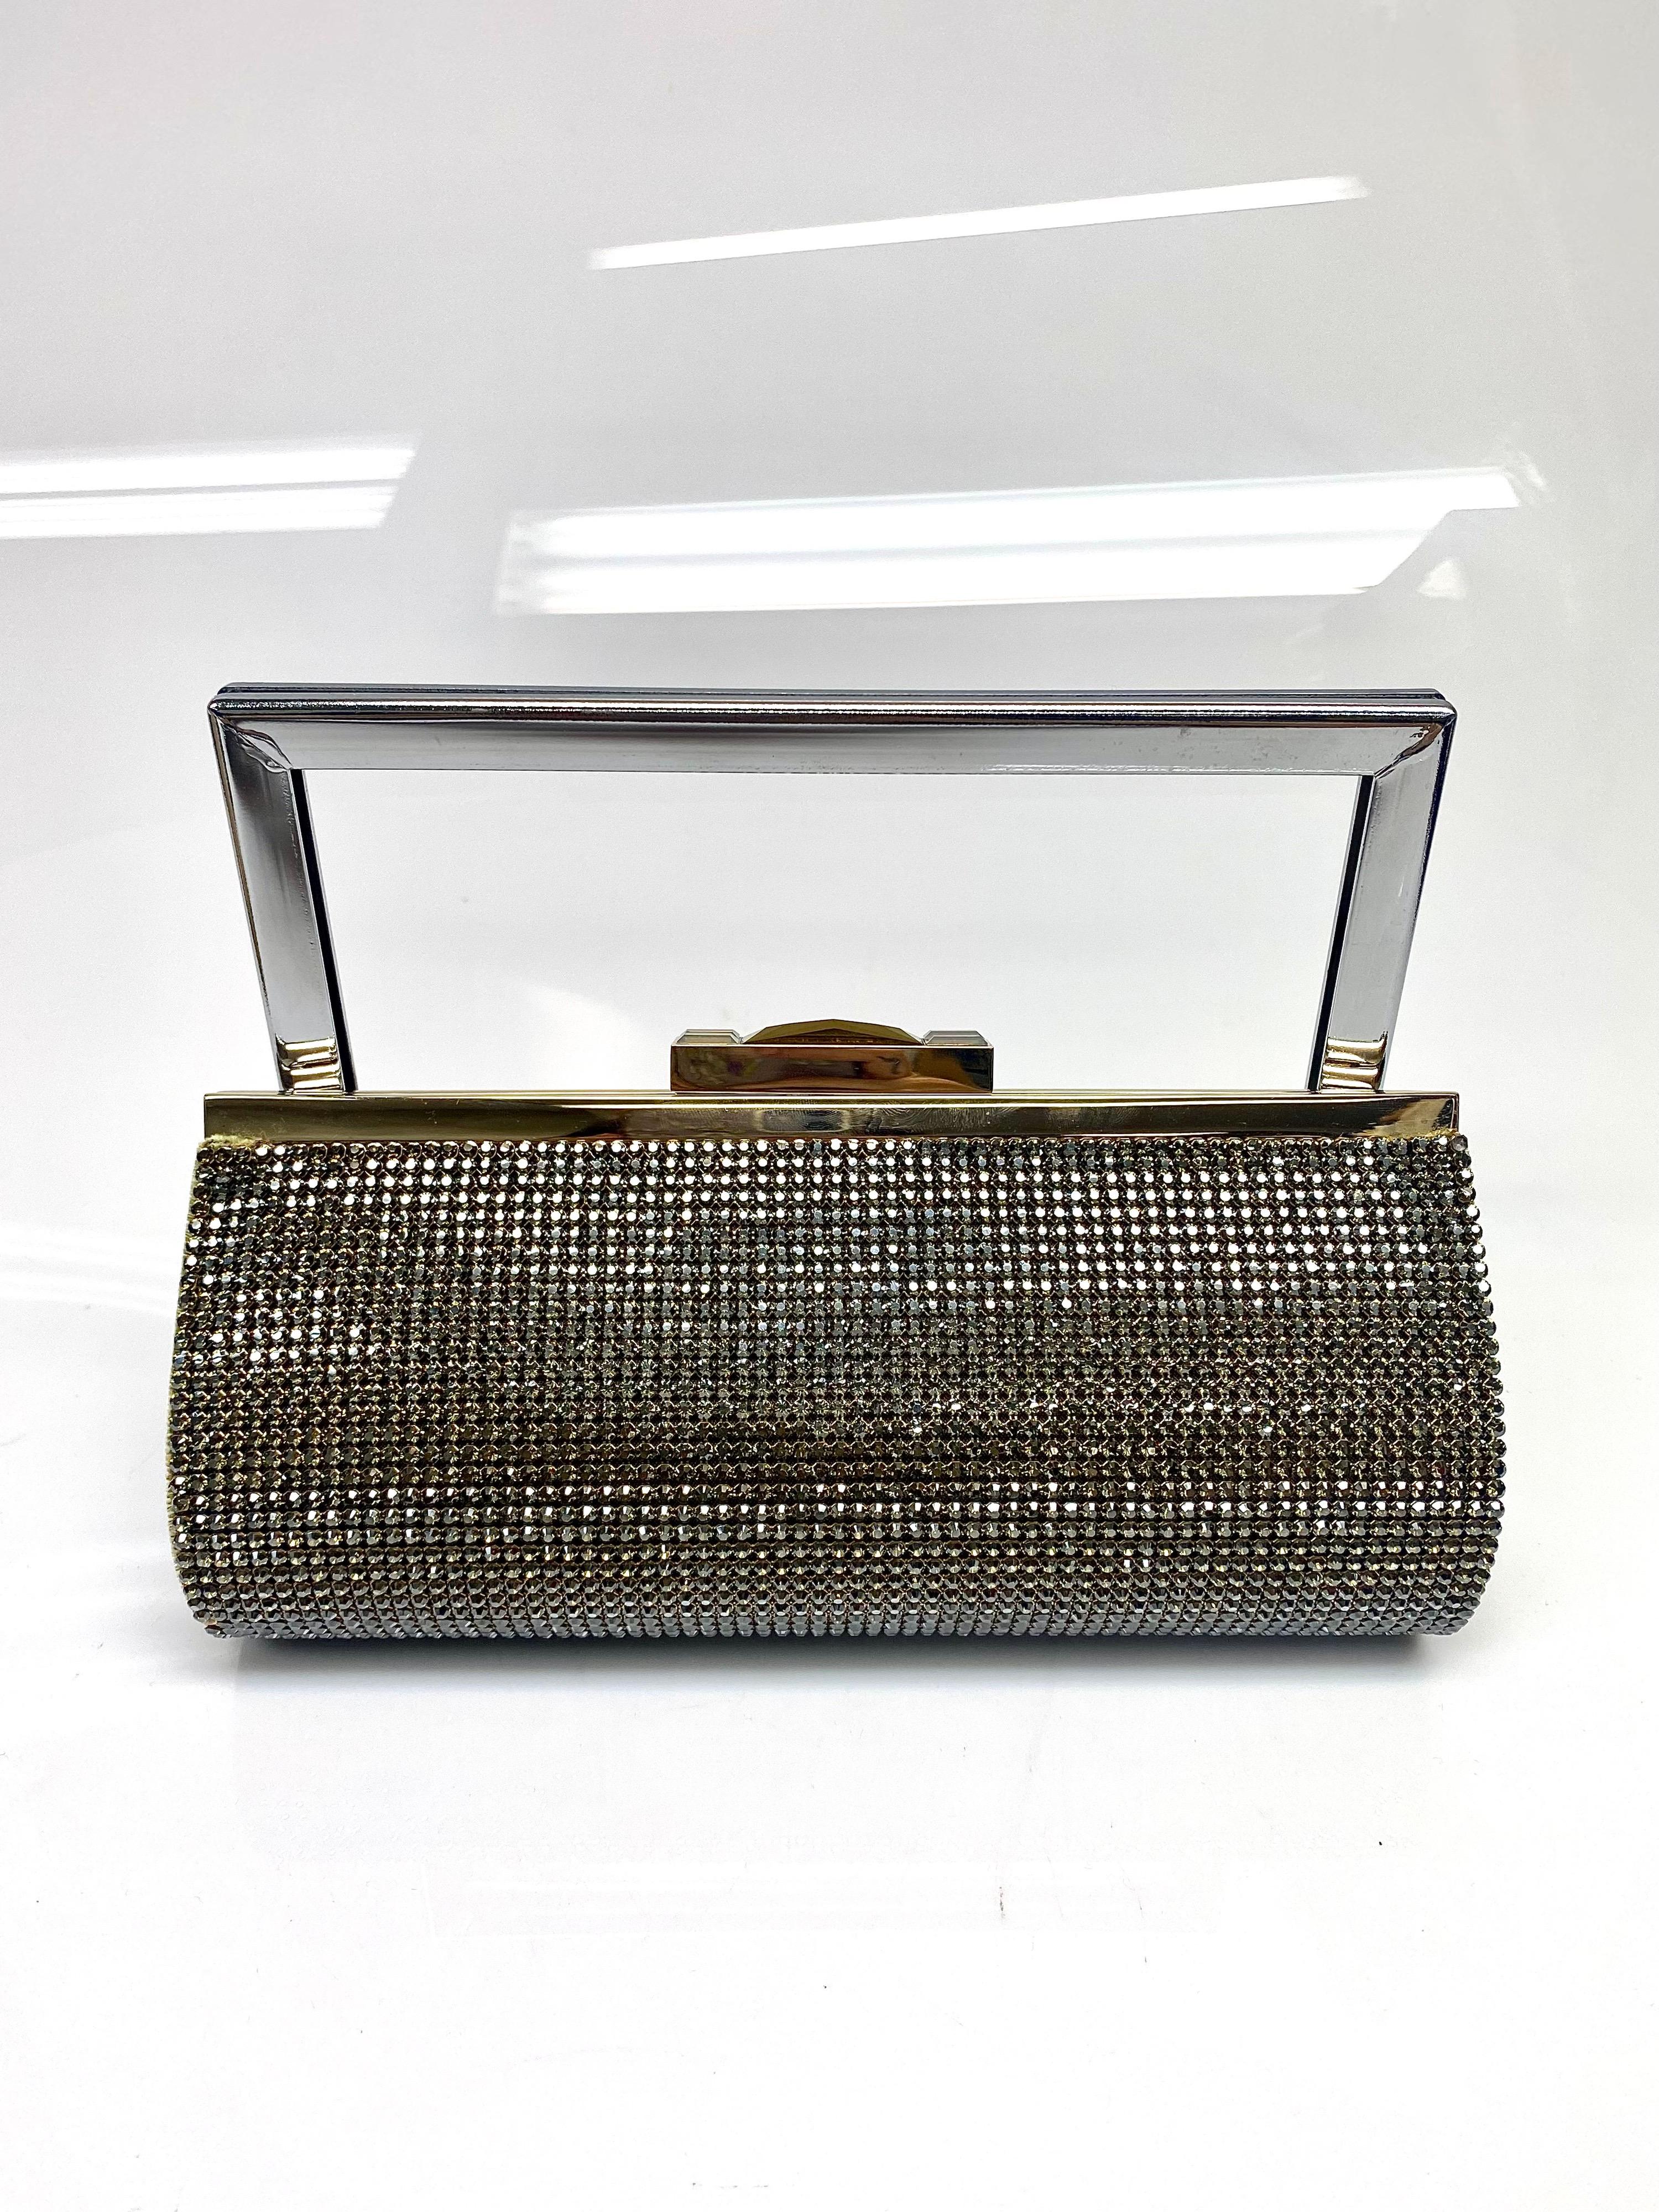 Daniel Swarovski Gold Clutch with Chain Strap. This clutch adorned in Swarovski crystals is the perfect glamorous piece to match with any nighttime outfit. The chain is removable, and the item is in excellent condition. 

Chain length: 9